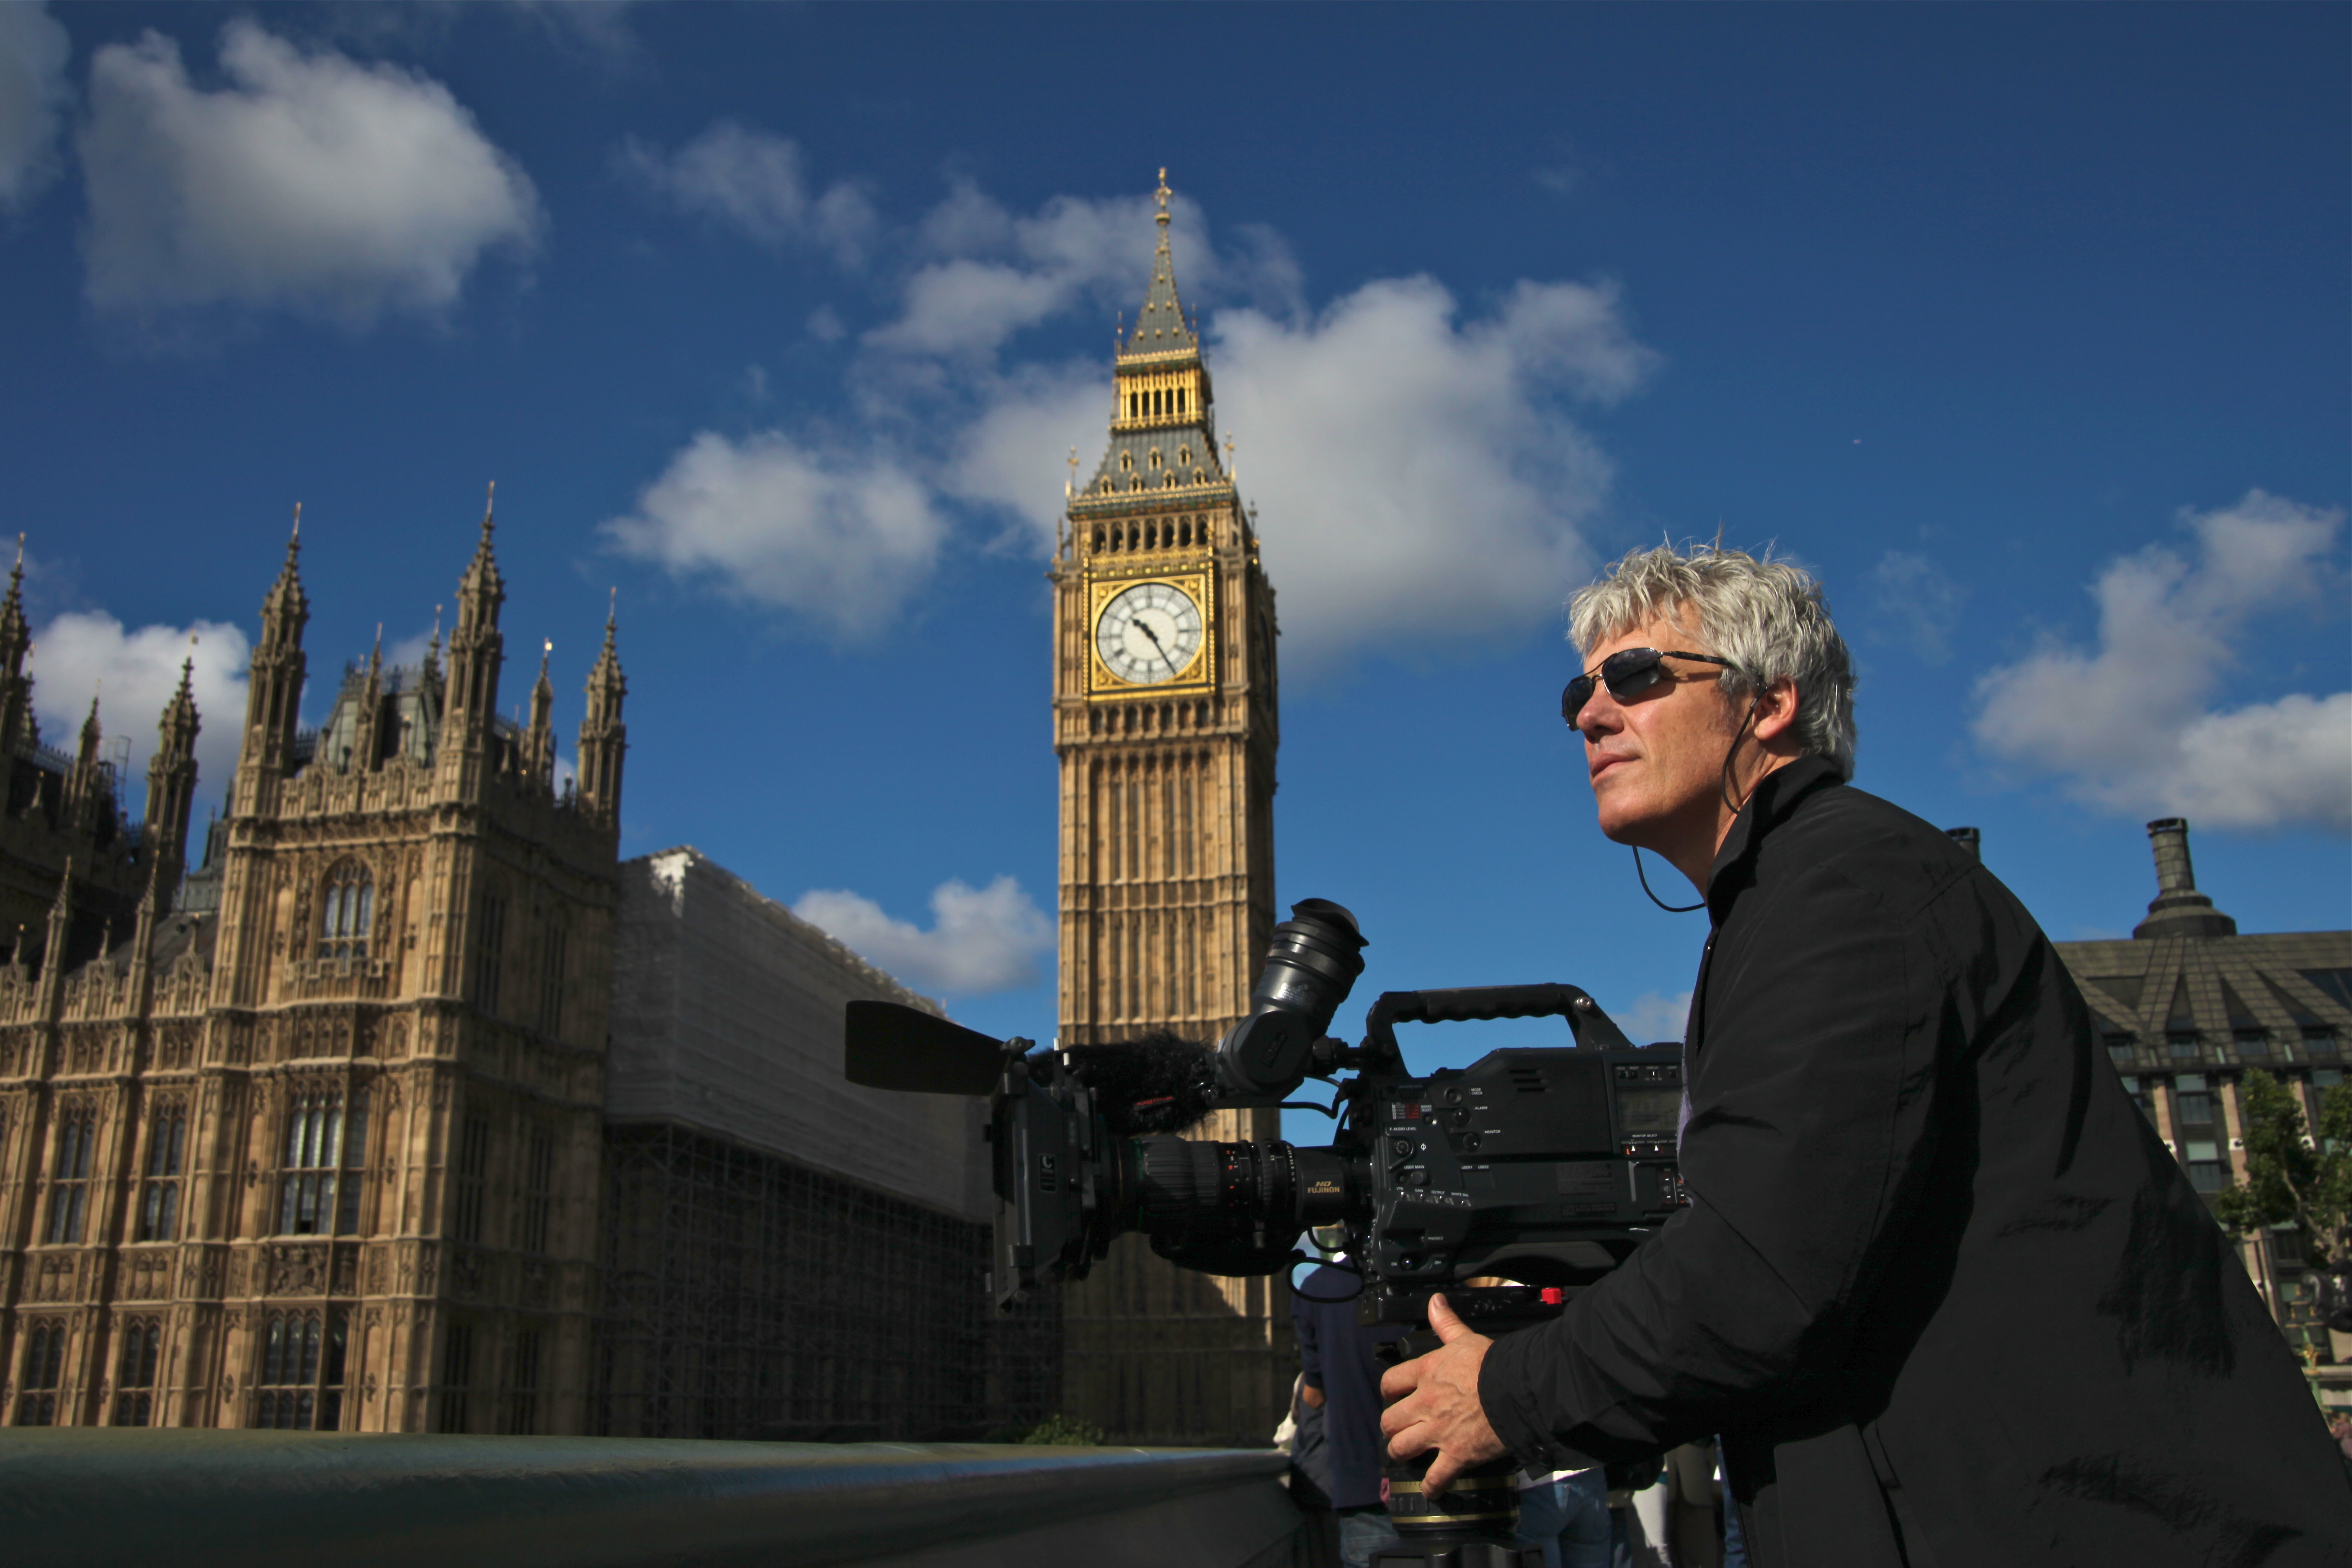 Director Peter von Puttkamer lines up a shot in London, England, for: 